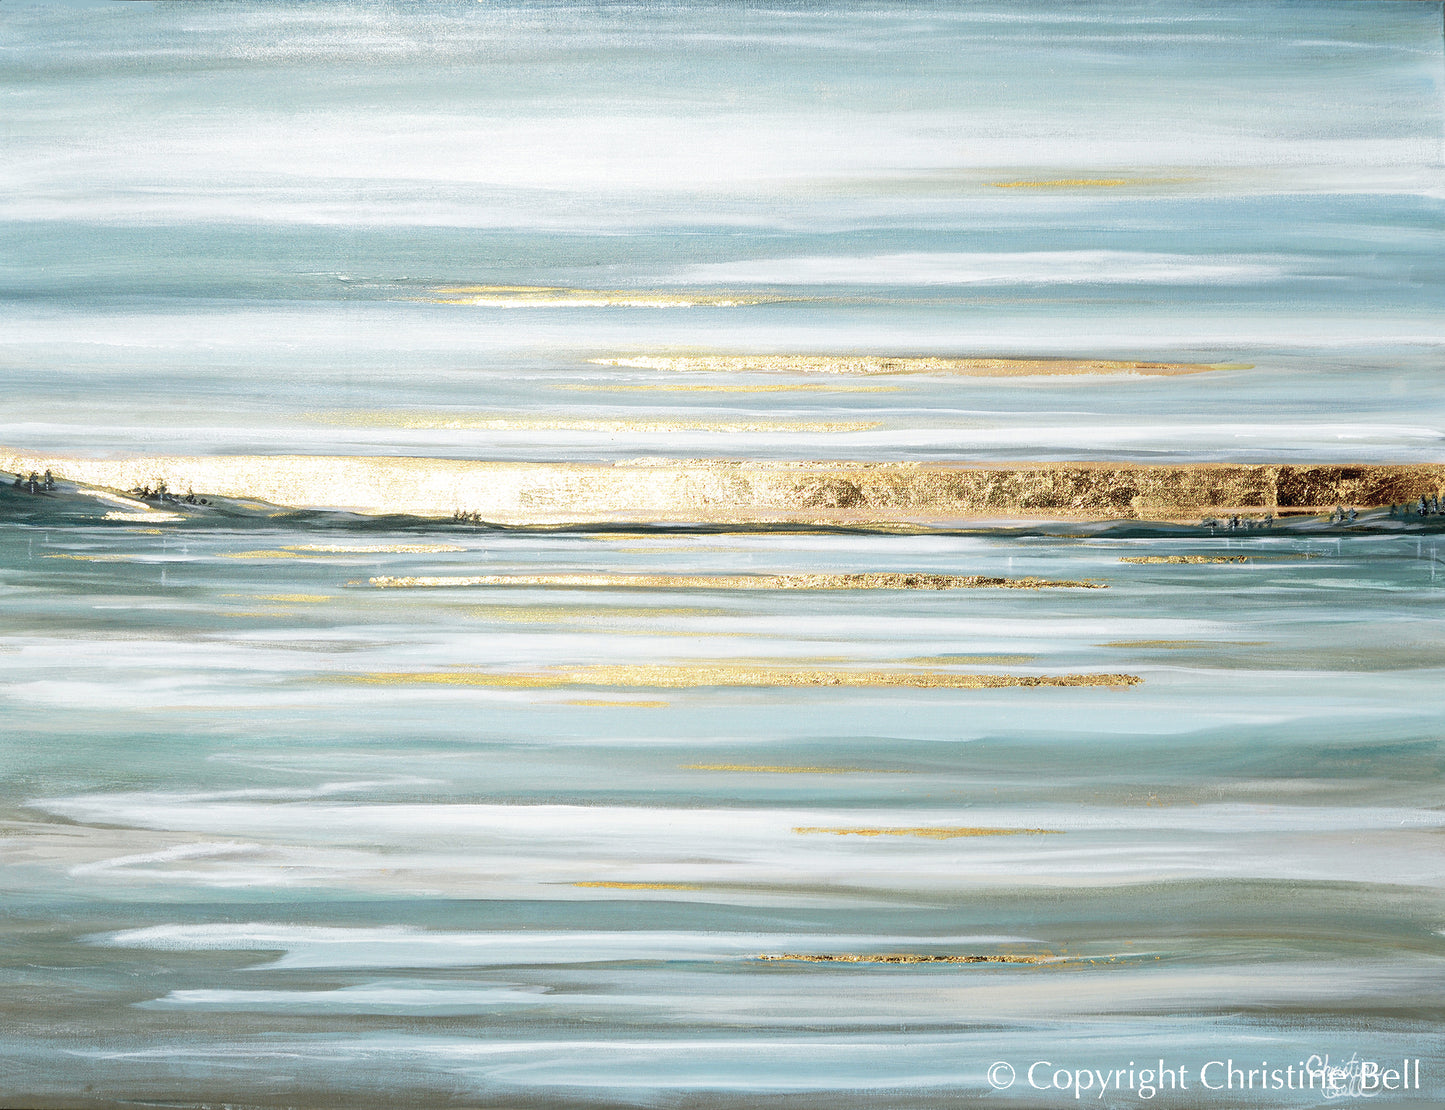 "Idyllic Pause" ORIGINAL Oil Painting, Seascape with Gold Leaf, 48x36"